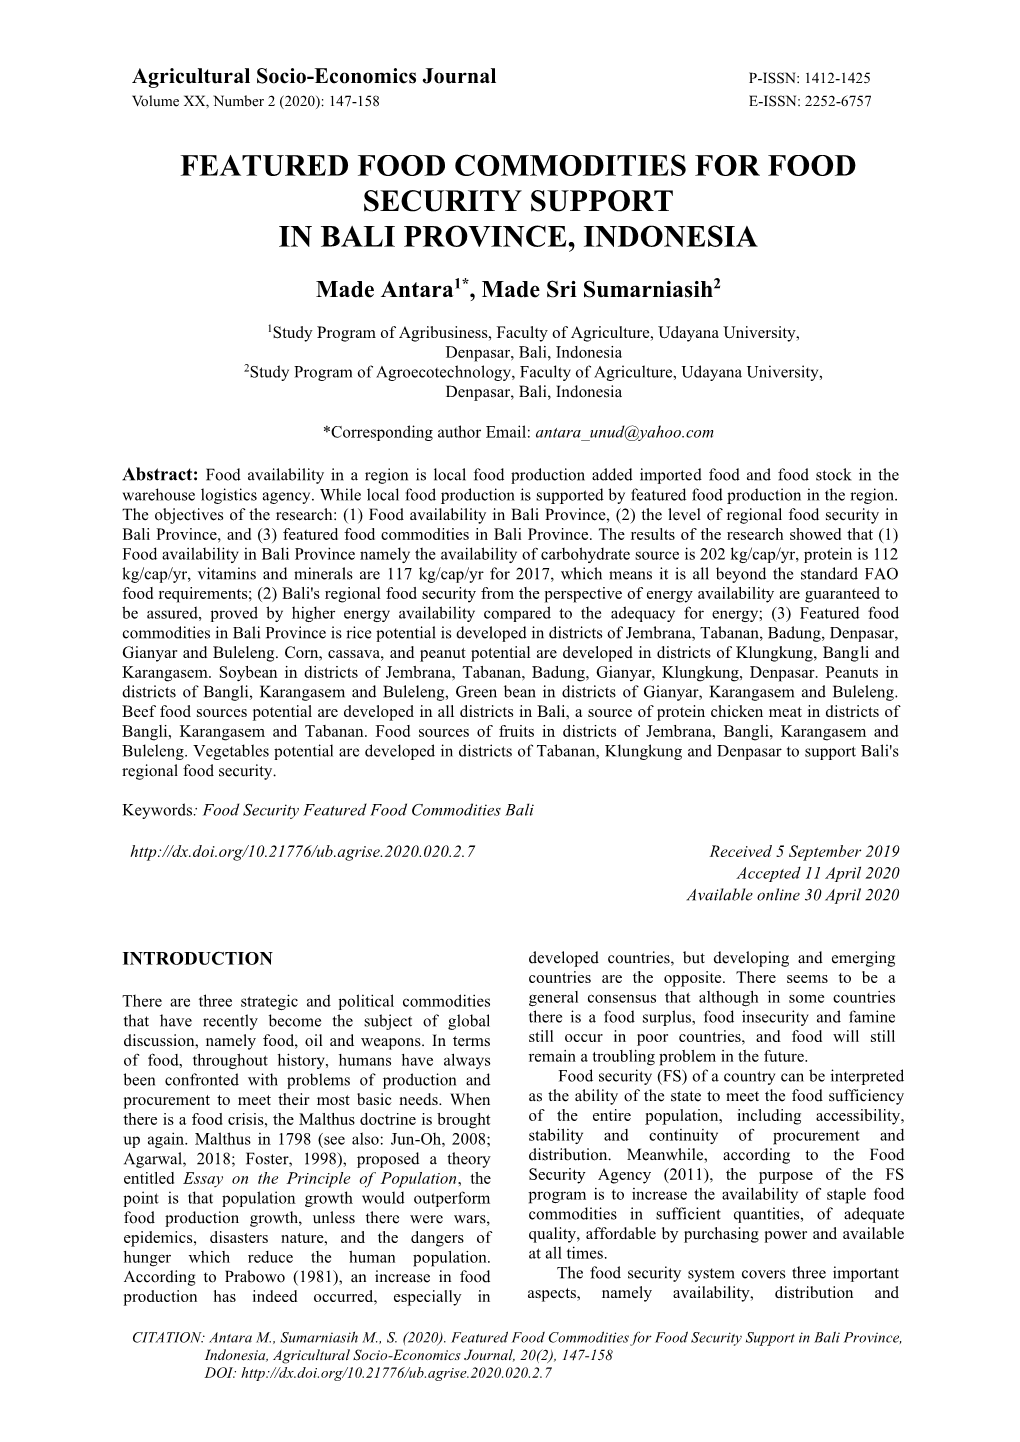 Featured Food Commodities for Food Security Support in Bali Province, Indonesia